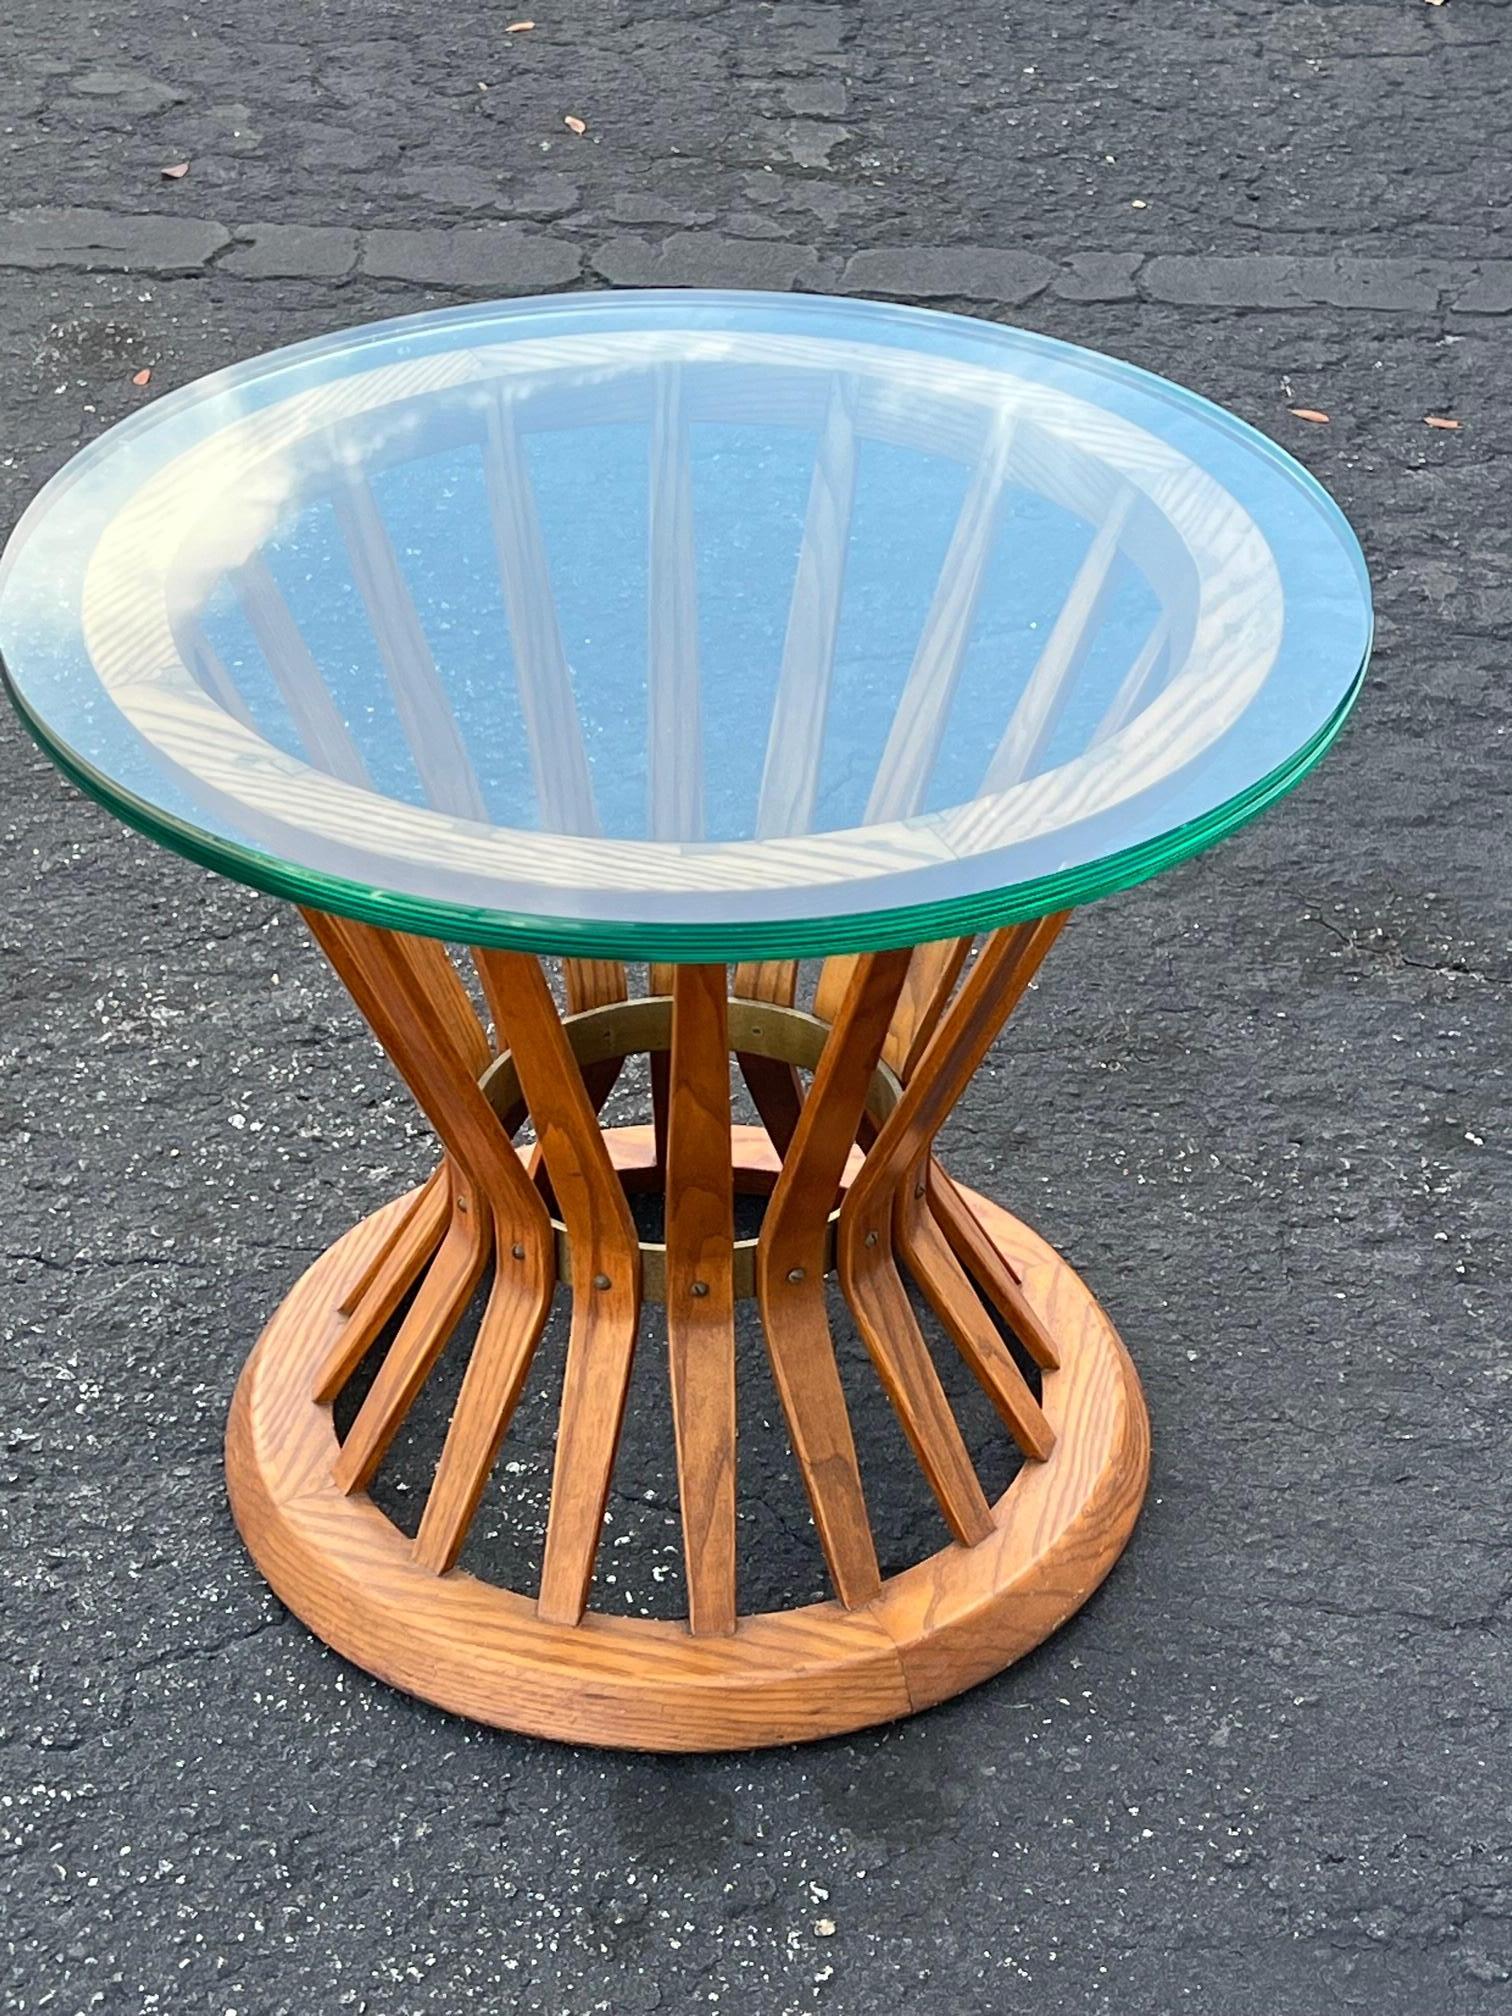 A classic Edward Wormley for Dunbar sheaf of wheat side table. Original 1950’s label. Comes with 3/4” thick 24”glass. Could be used with stone or different piece of glass. 